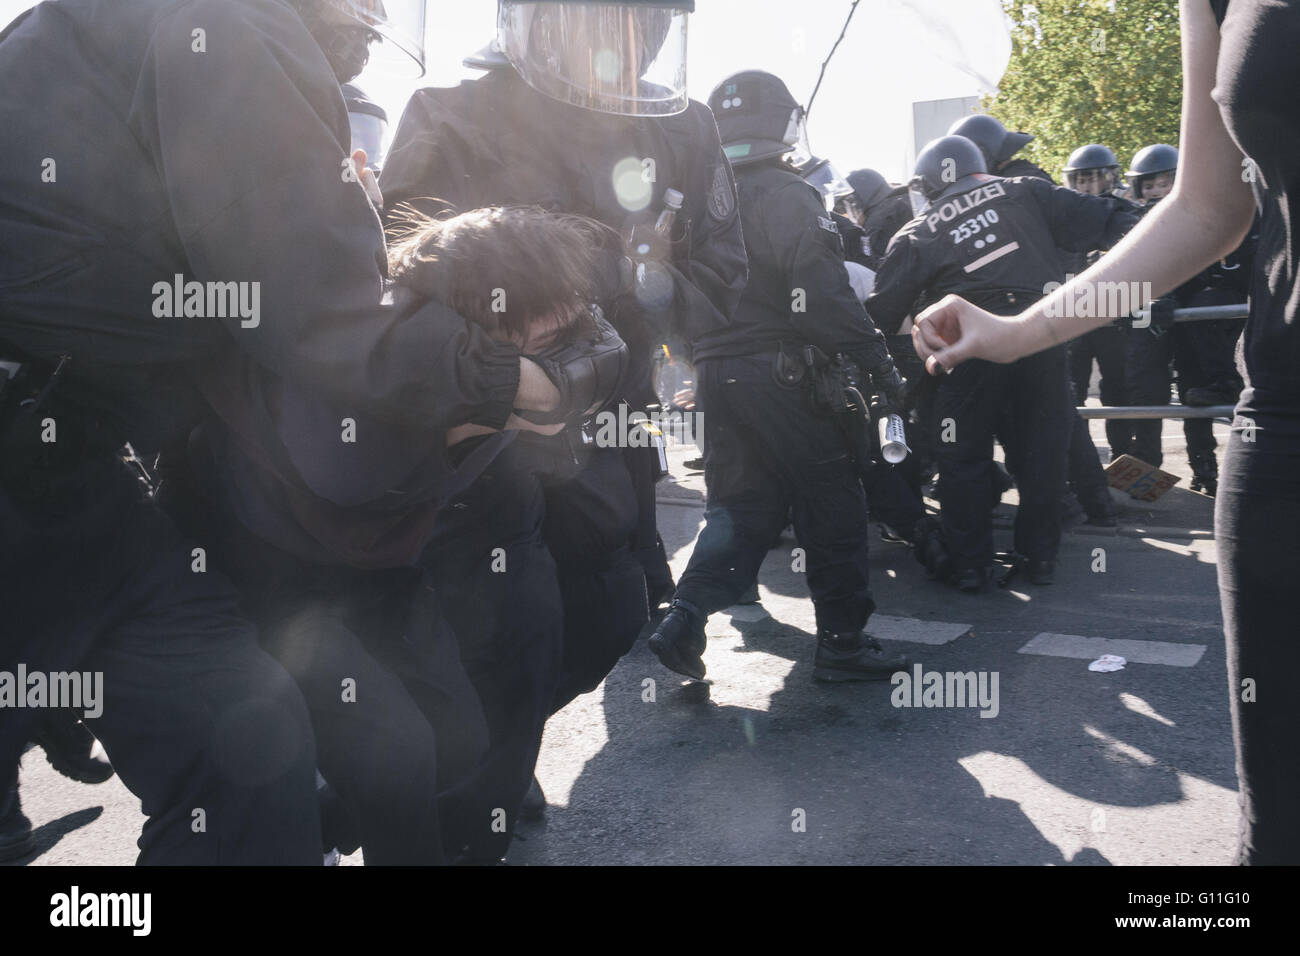 Berlin, Berlin, Germany. 7th May, 2016. An activist is arrested by the police during the counter protests against rally held under the motto 'Merkel muss weg![Merkel must go]' organised by far-right group 'We for Berlin & We for Germany' Credit:  Jan Scheunert/ZUMA Wire/Alamy Live News Stock Photo